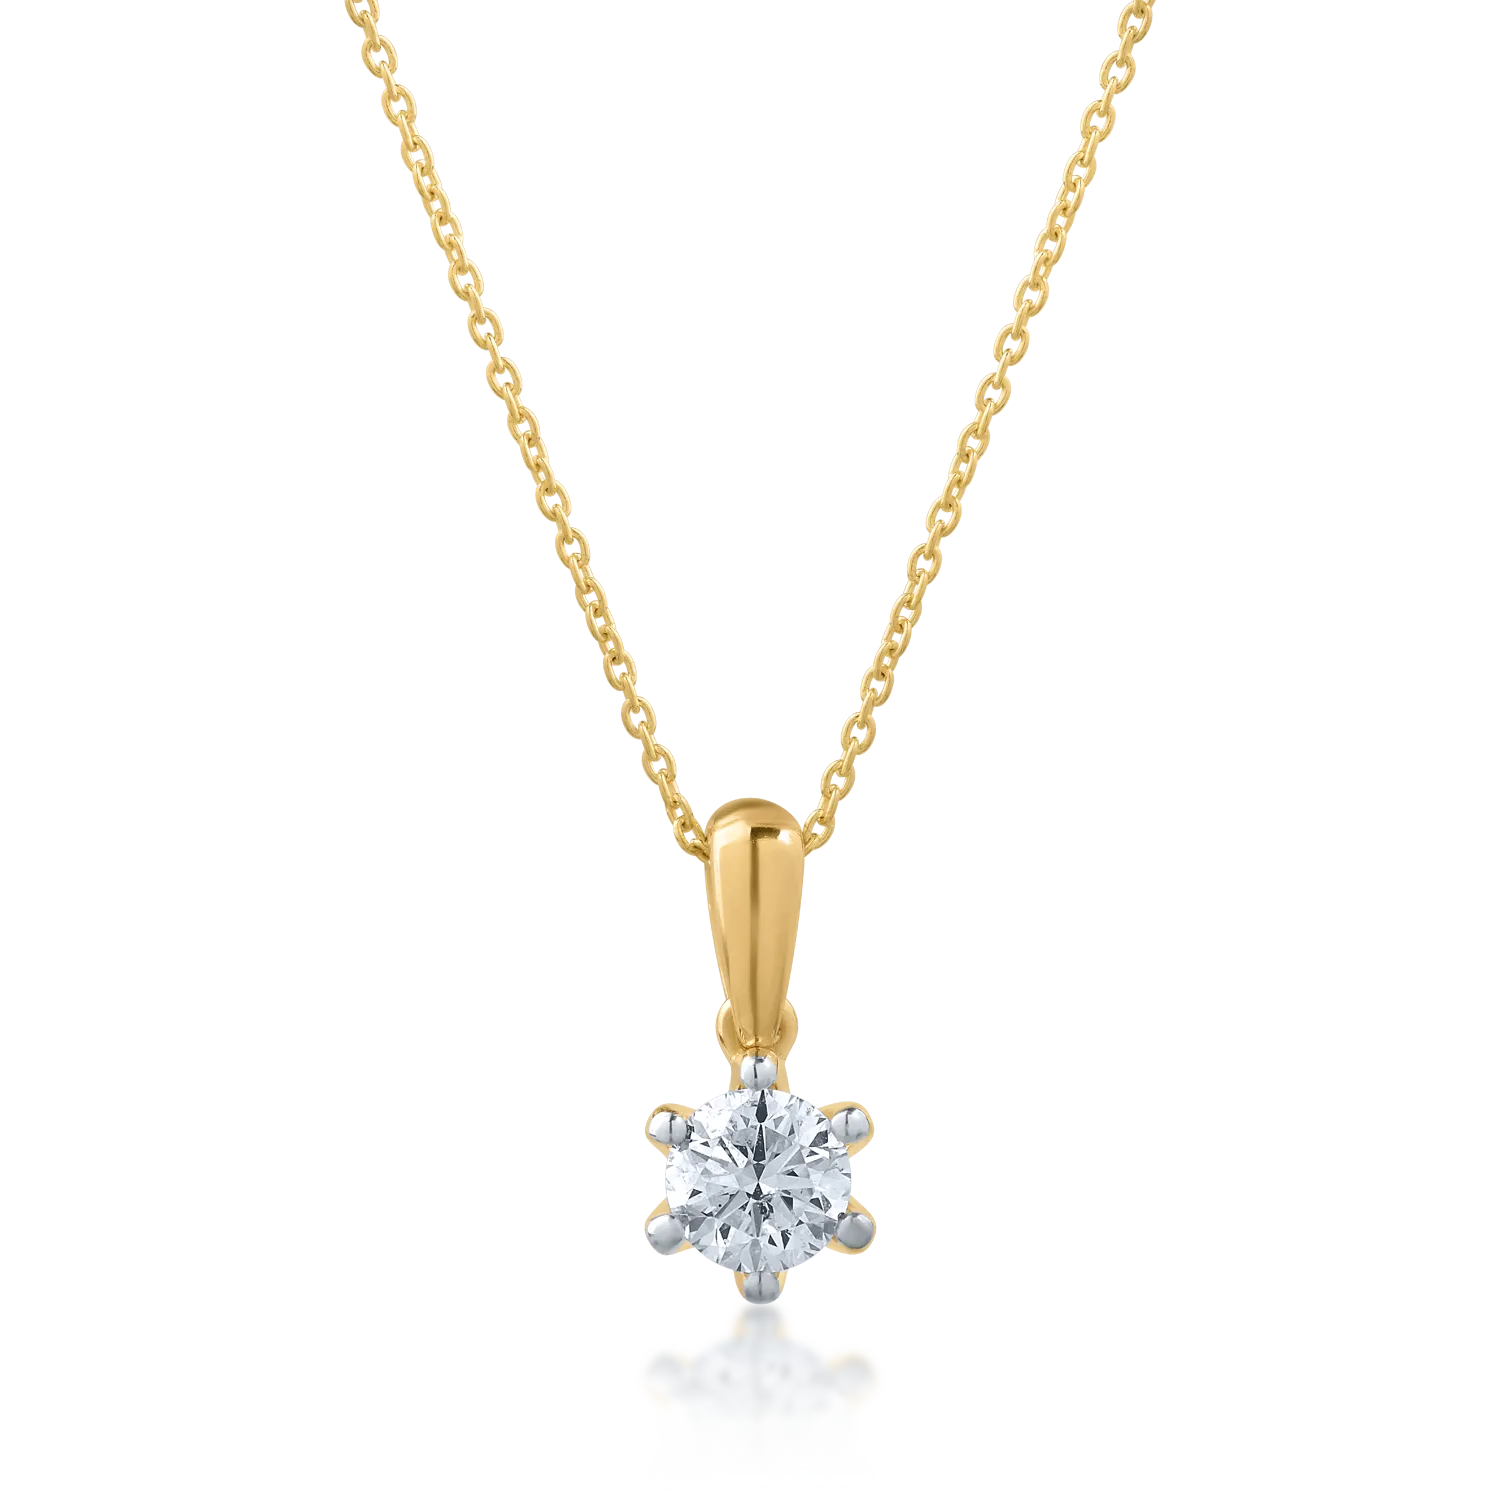 18K yellow gold pendant necklace with 0.305ct diamond